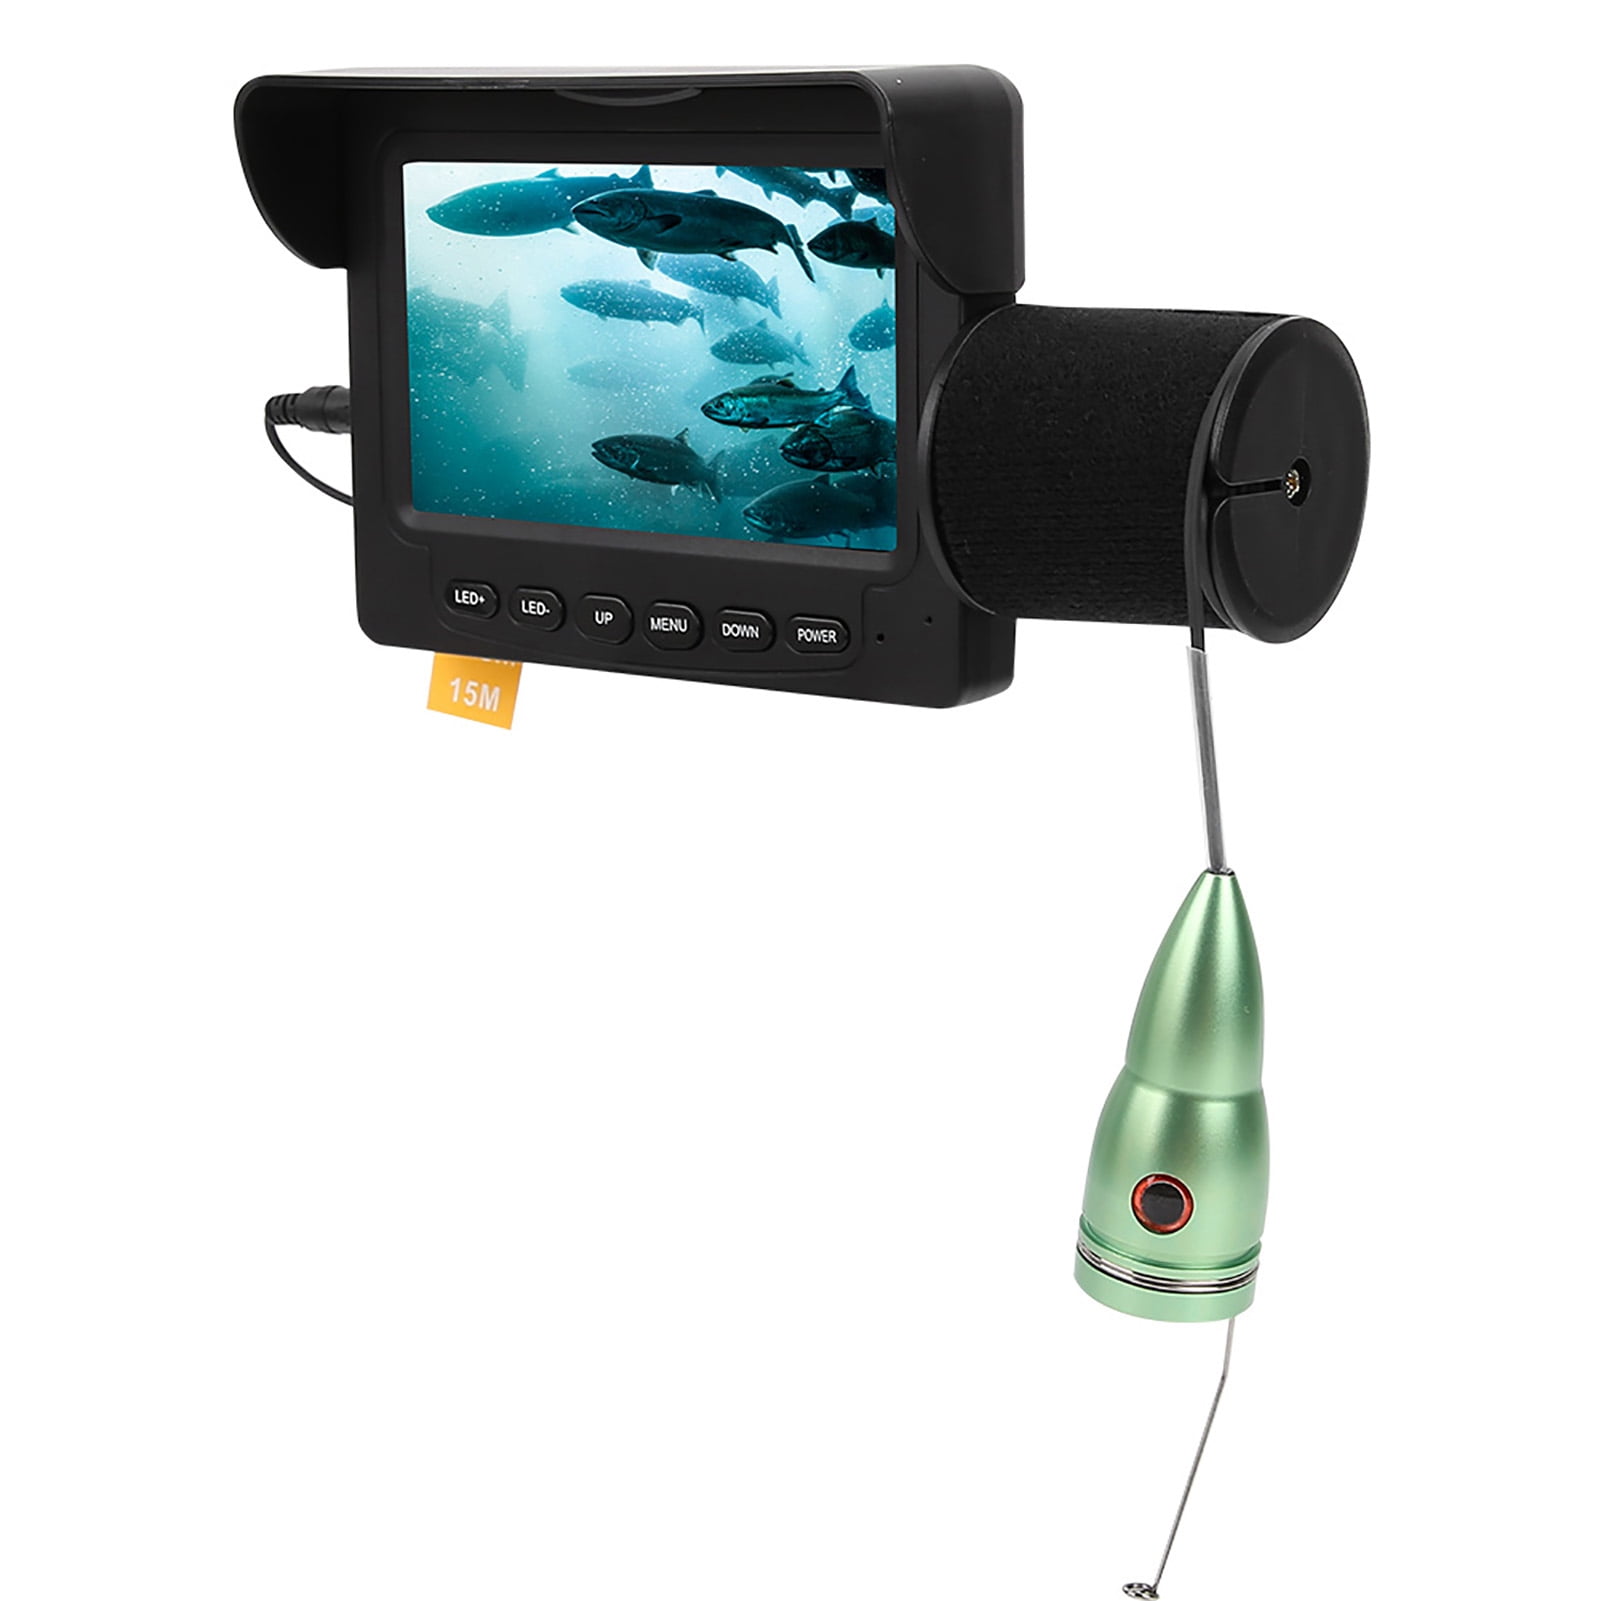 4.3inch HD Colorful Underwater Visual Fish Finder Video Camera Fishing Kit  with TFT Color Monitor for Monitoring Aquaculture Underwater Exploration 